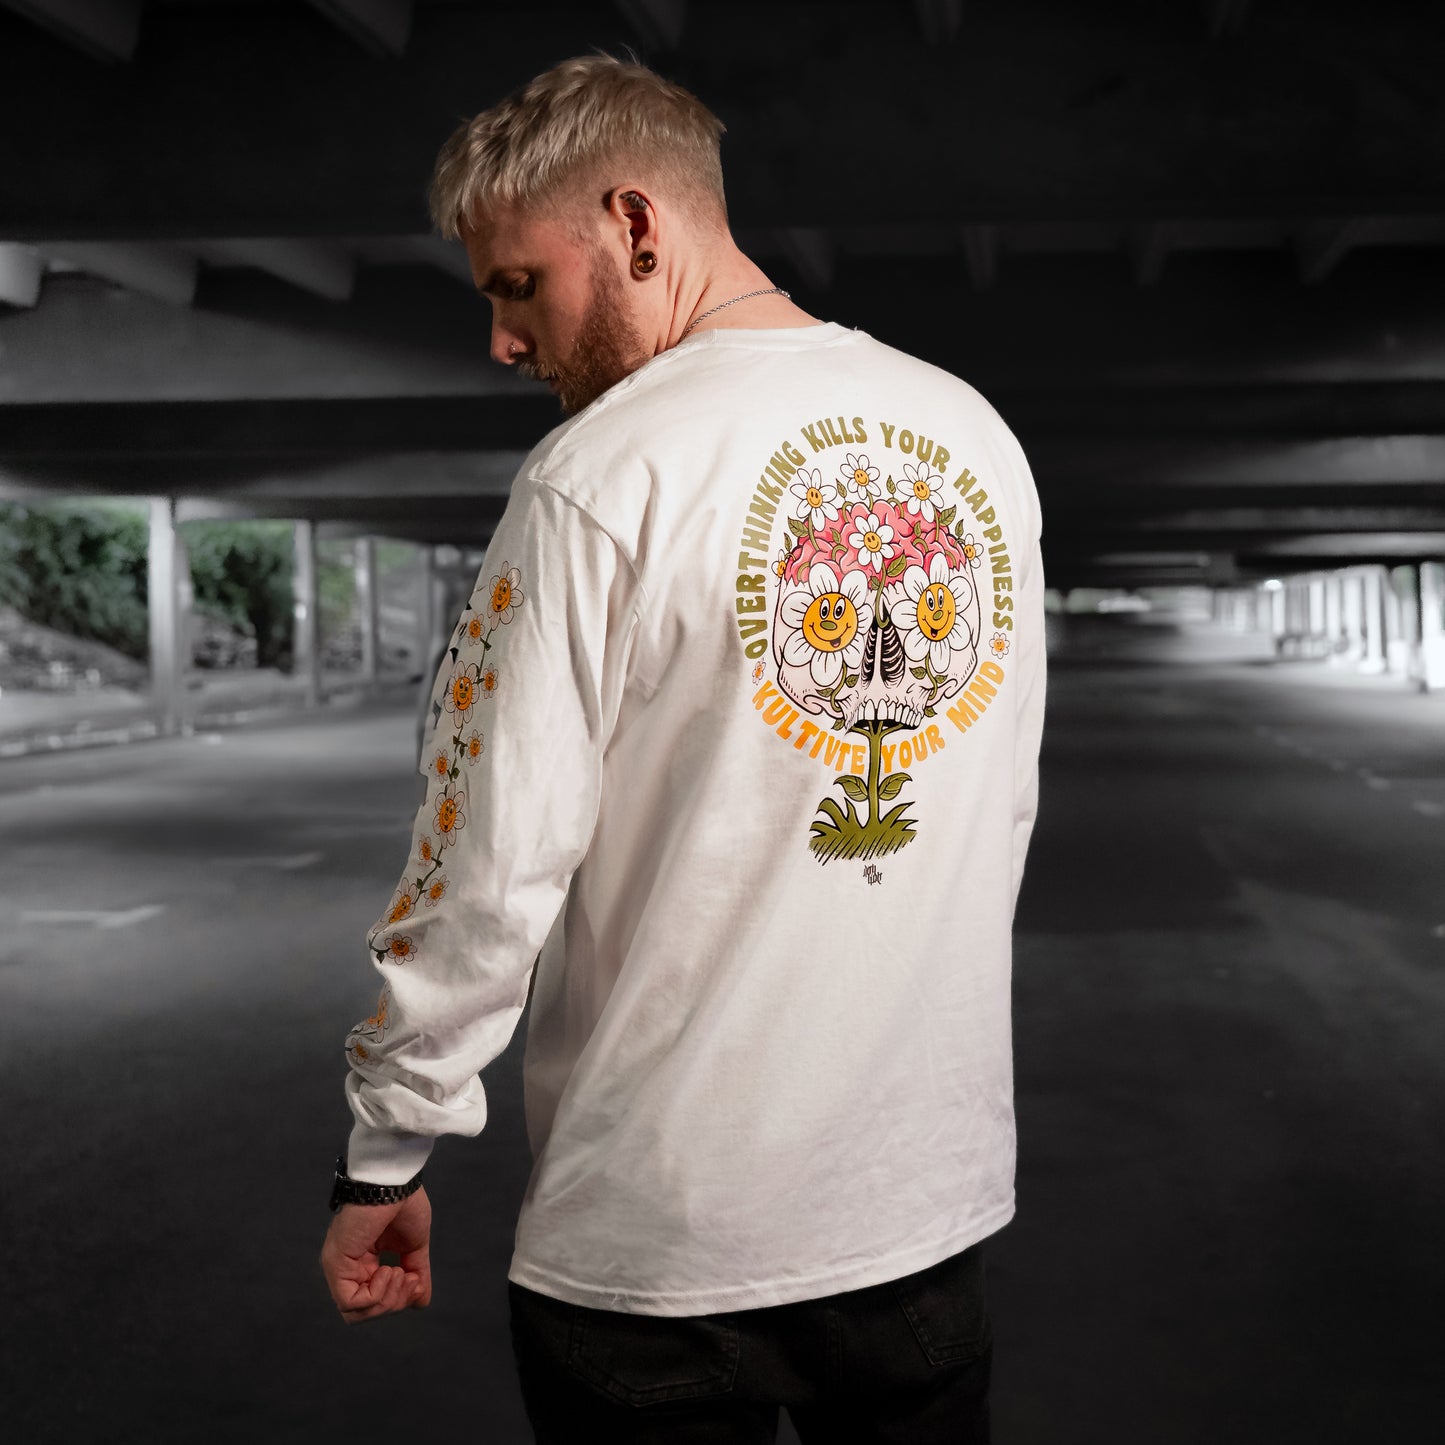 'KULTIVATE YOUR MIND' LONGSLEEVE - WHITE